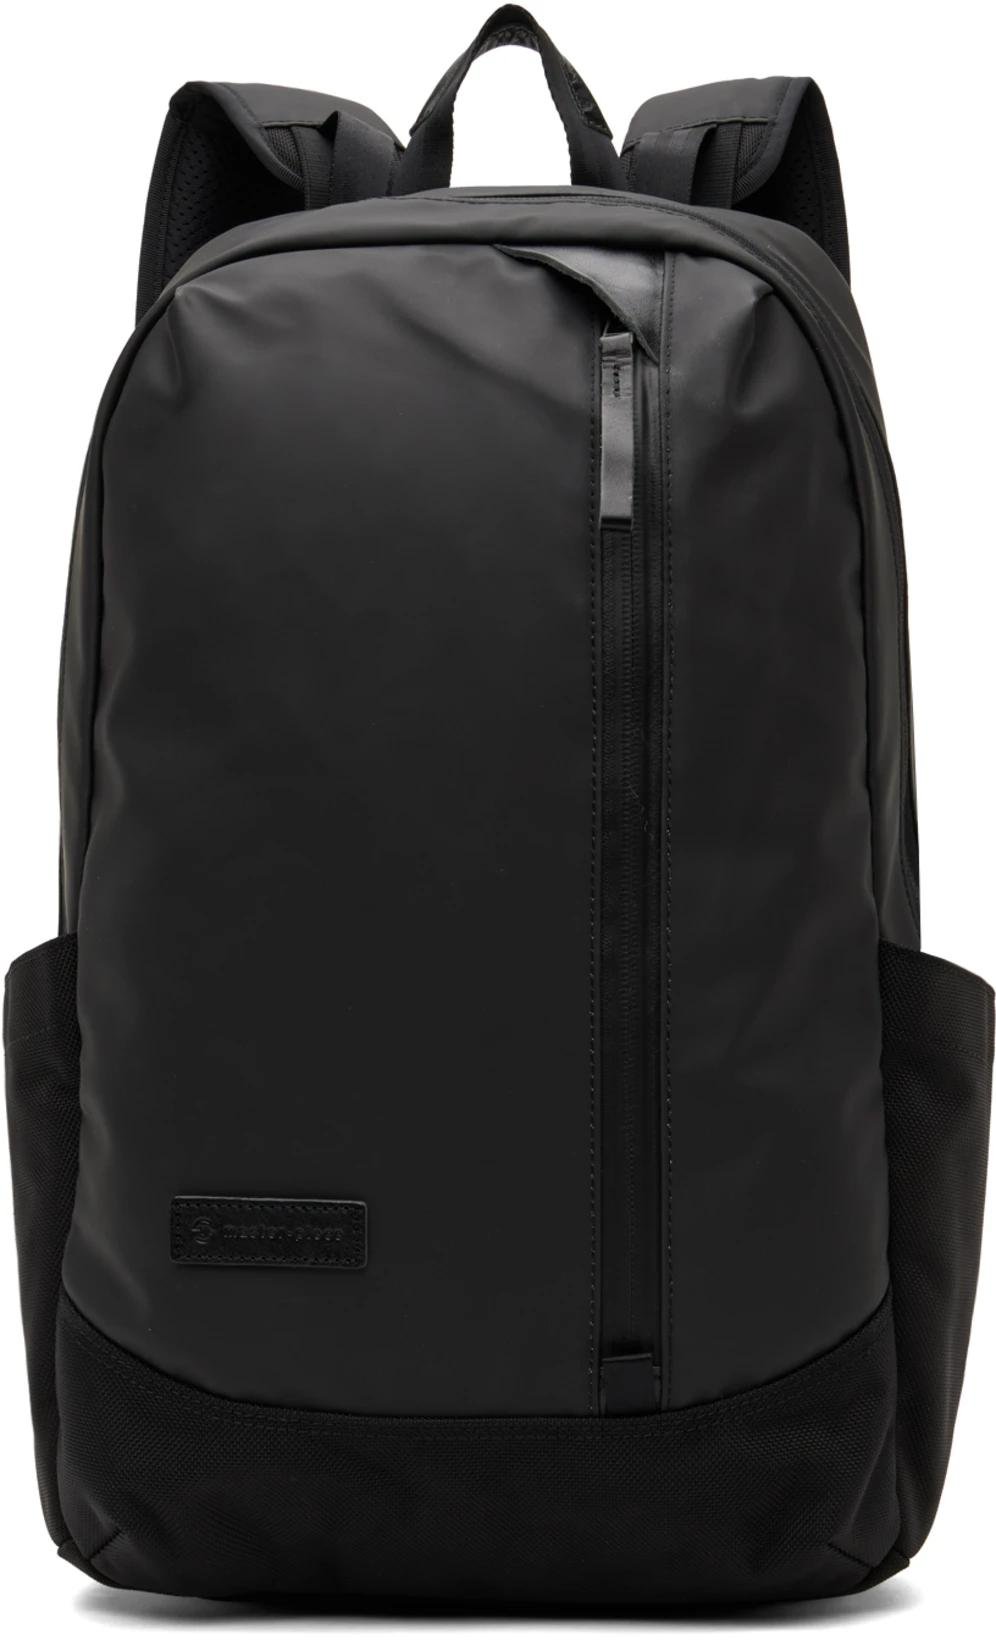 Black Slick Backpack by MASTER-PIECE | jellibeans